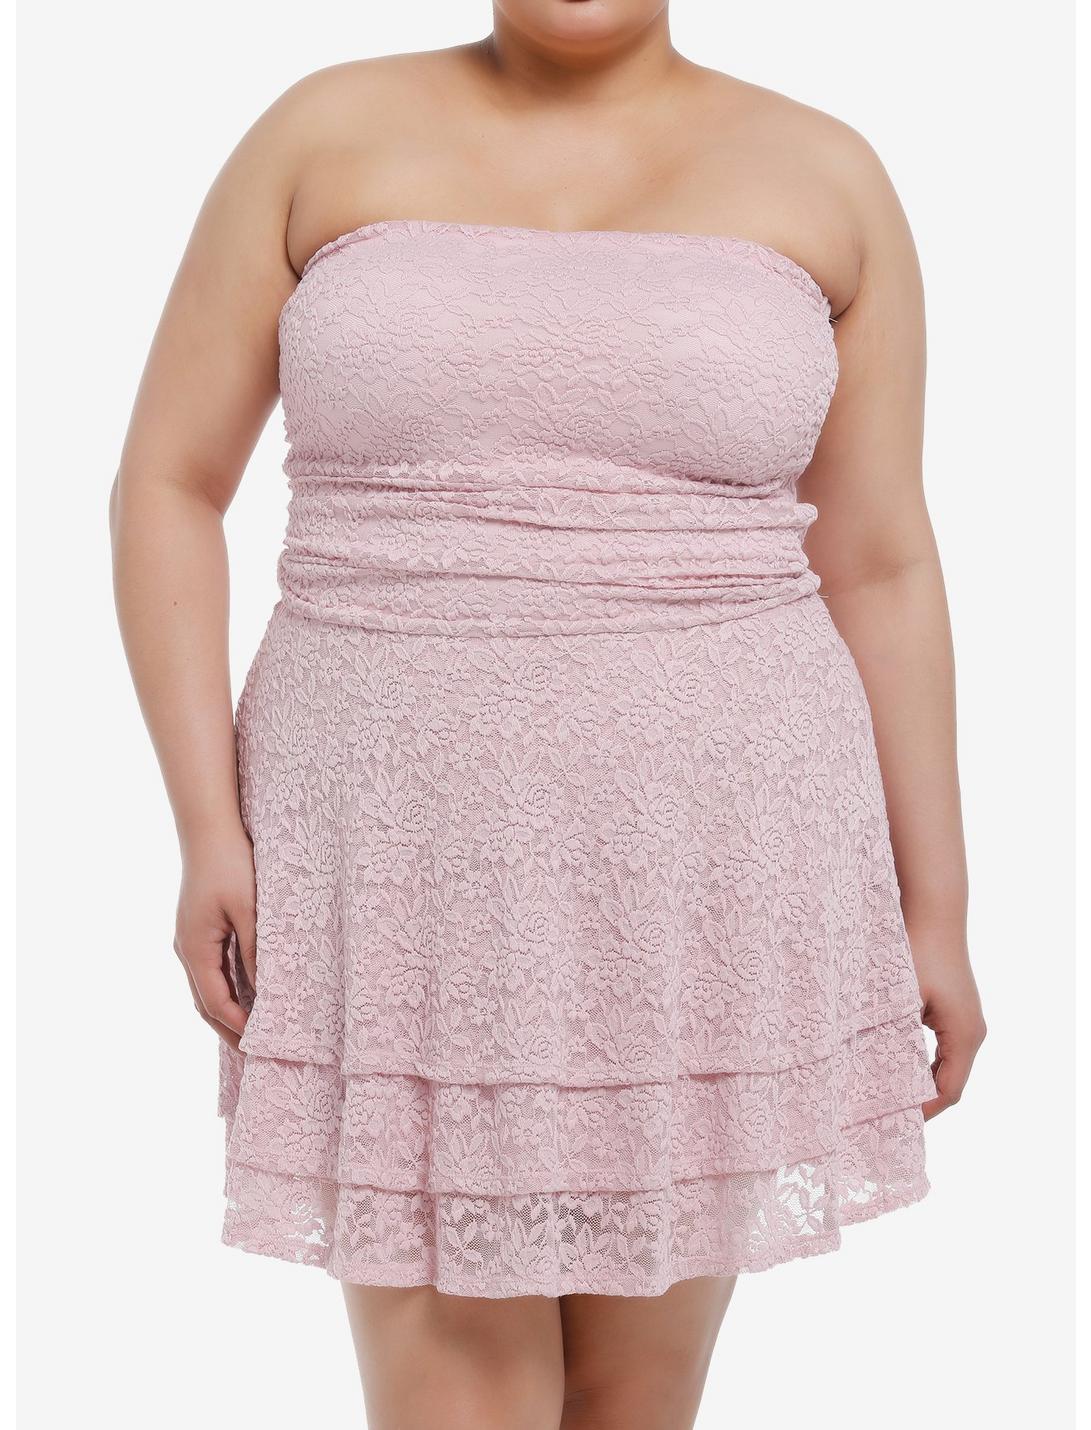 Sweet Society Pink Lace Ruffle Strapless Dress Plus Size, PINK, hi-res